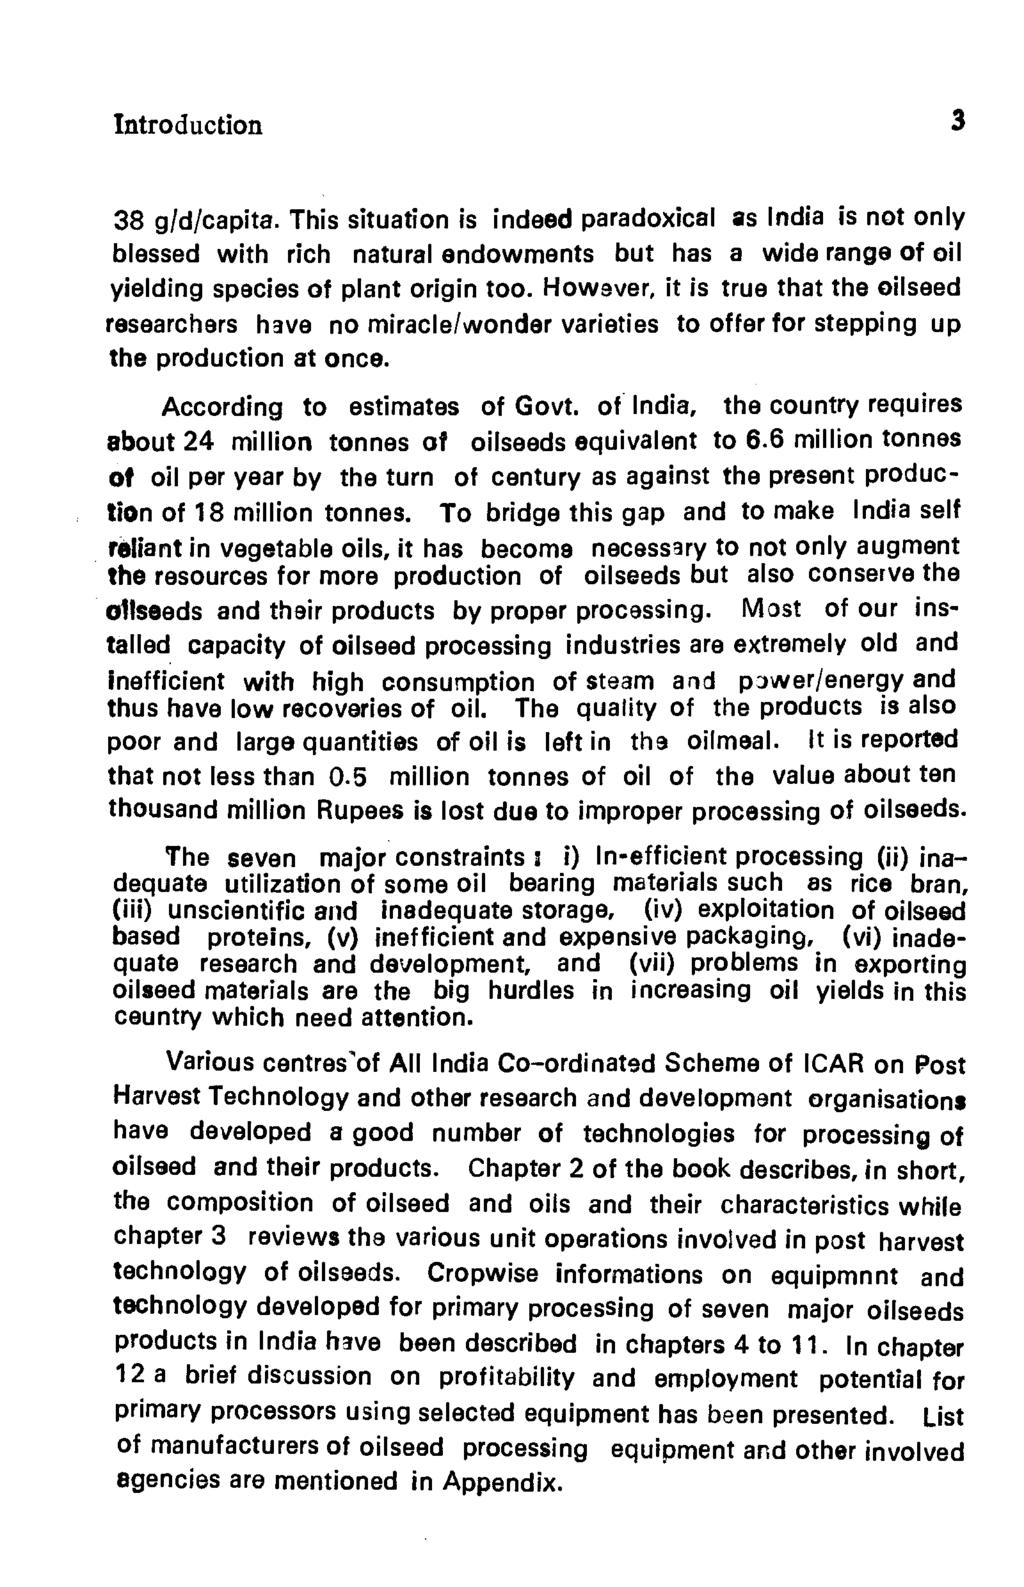 Introduction 38 g/d/capita. This situation is indeed paradoxical as India is not only blessed with rich natural endowments but has a wide range of oil yielding species of plant origin too.